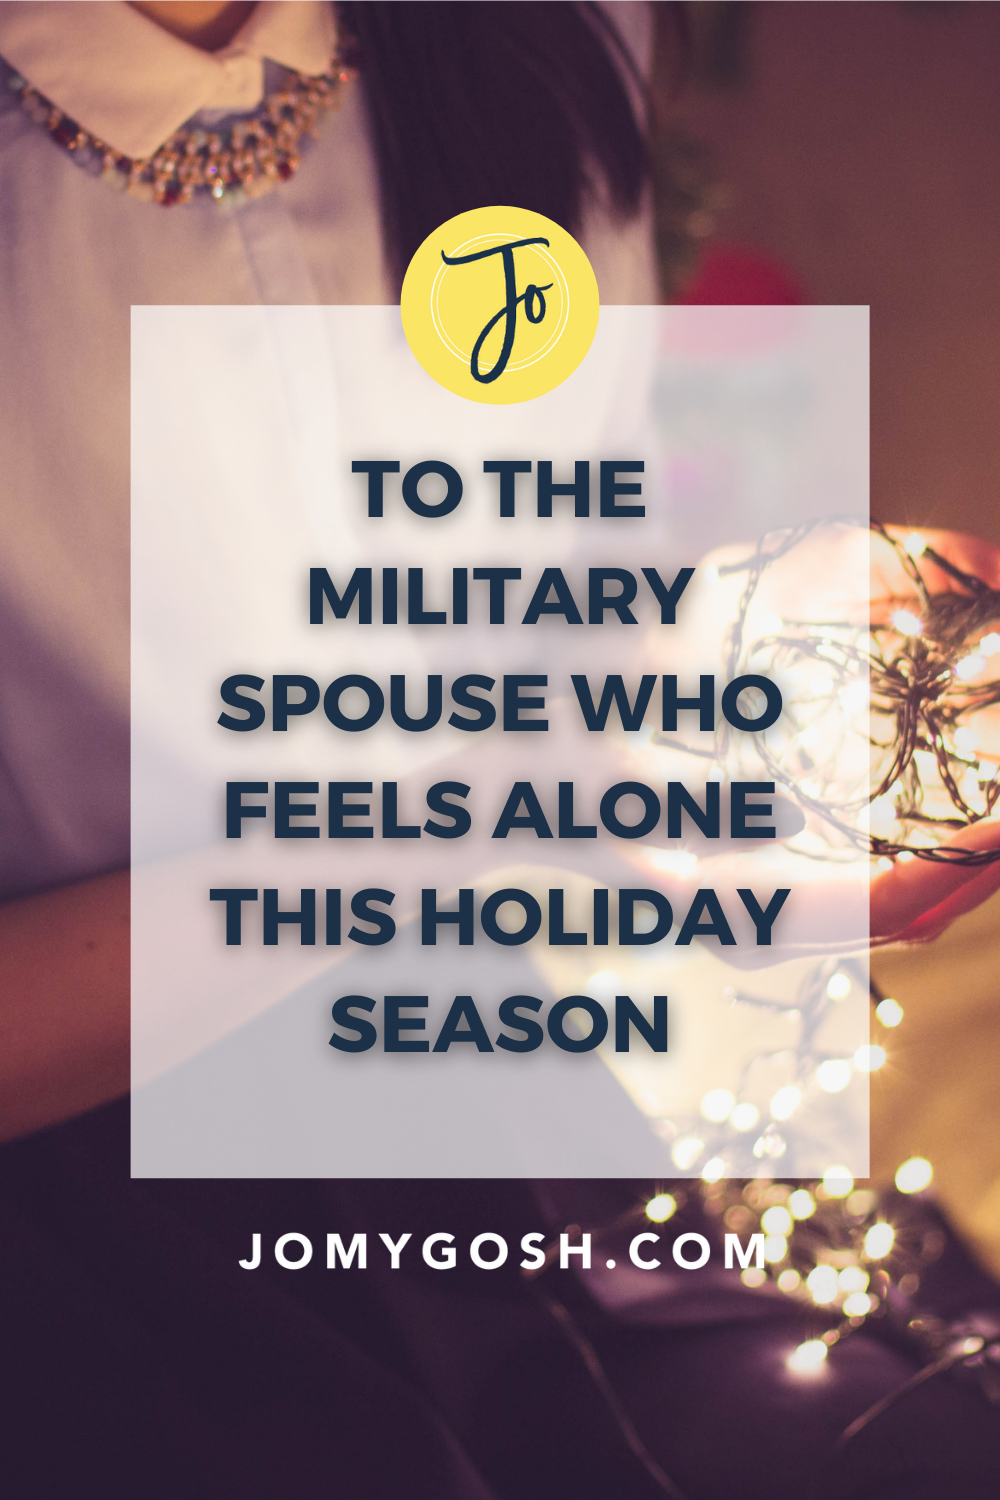 The holidays can be rough for military spouses. Here's what I want you to know.